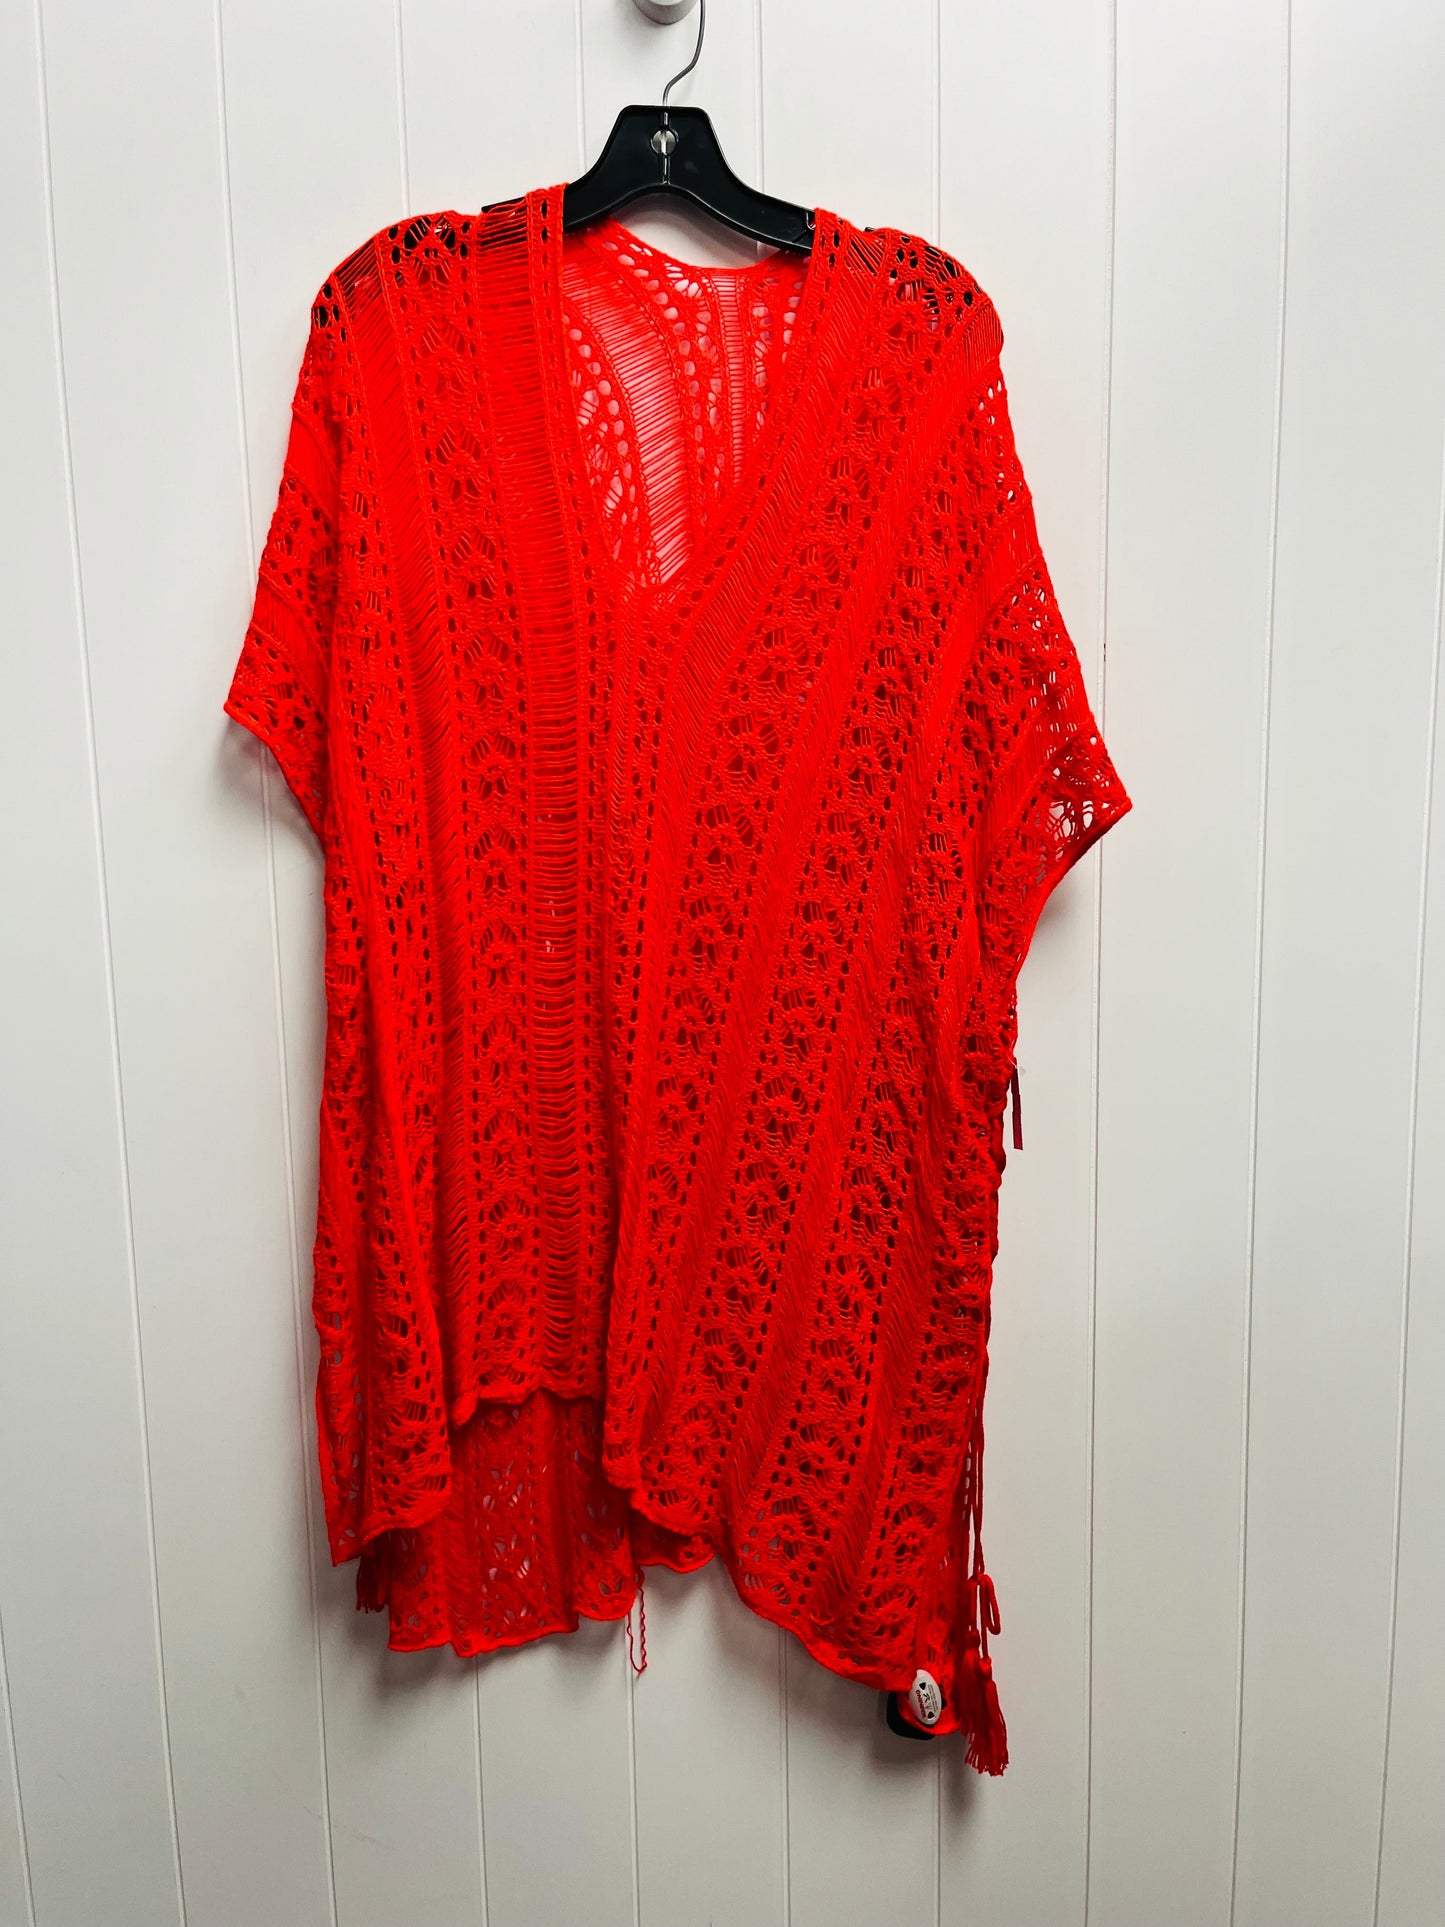 Red Tunic Short Sleeve Clothes Mentor, Size Onesize